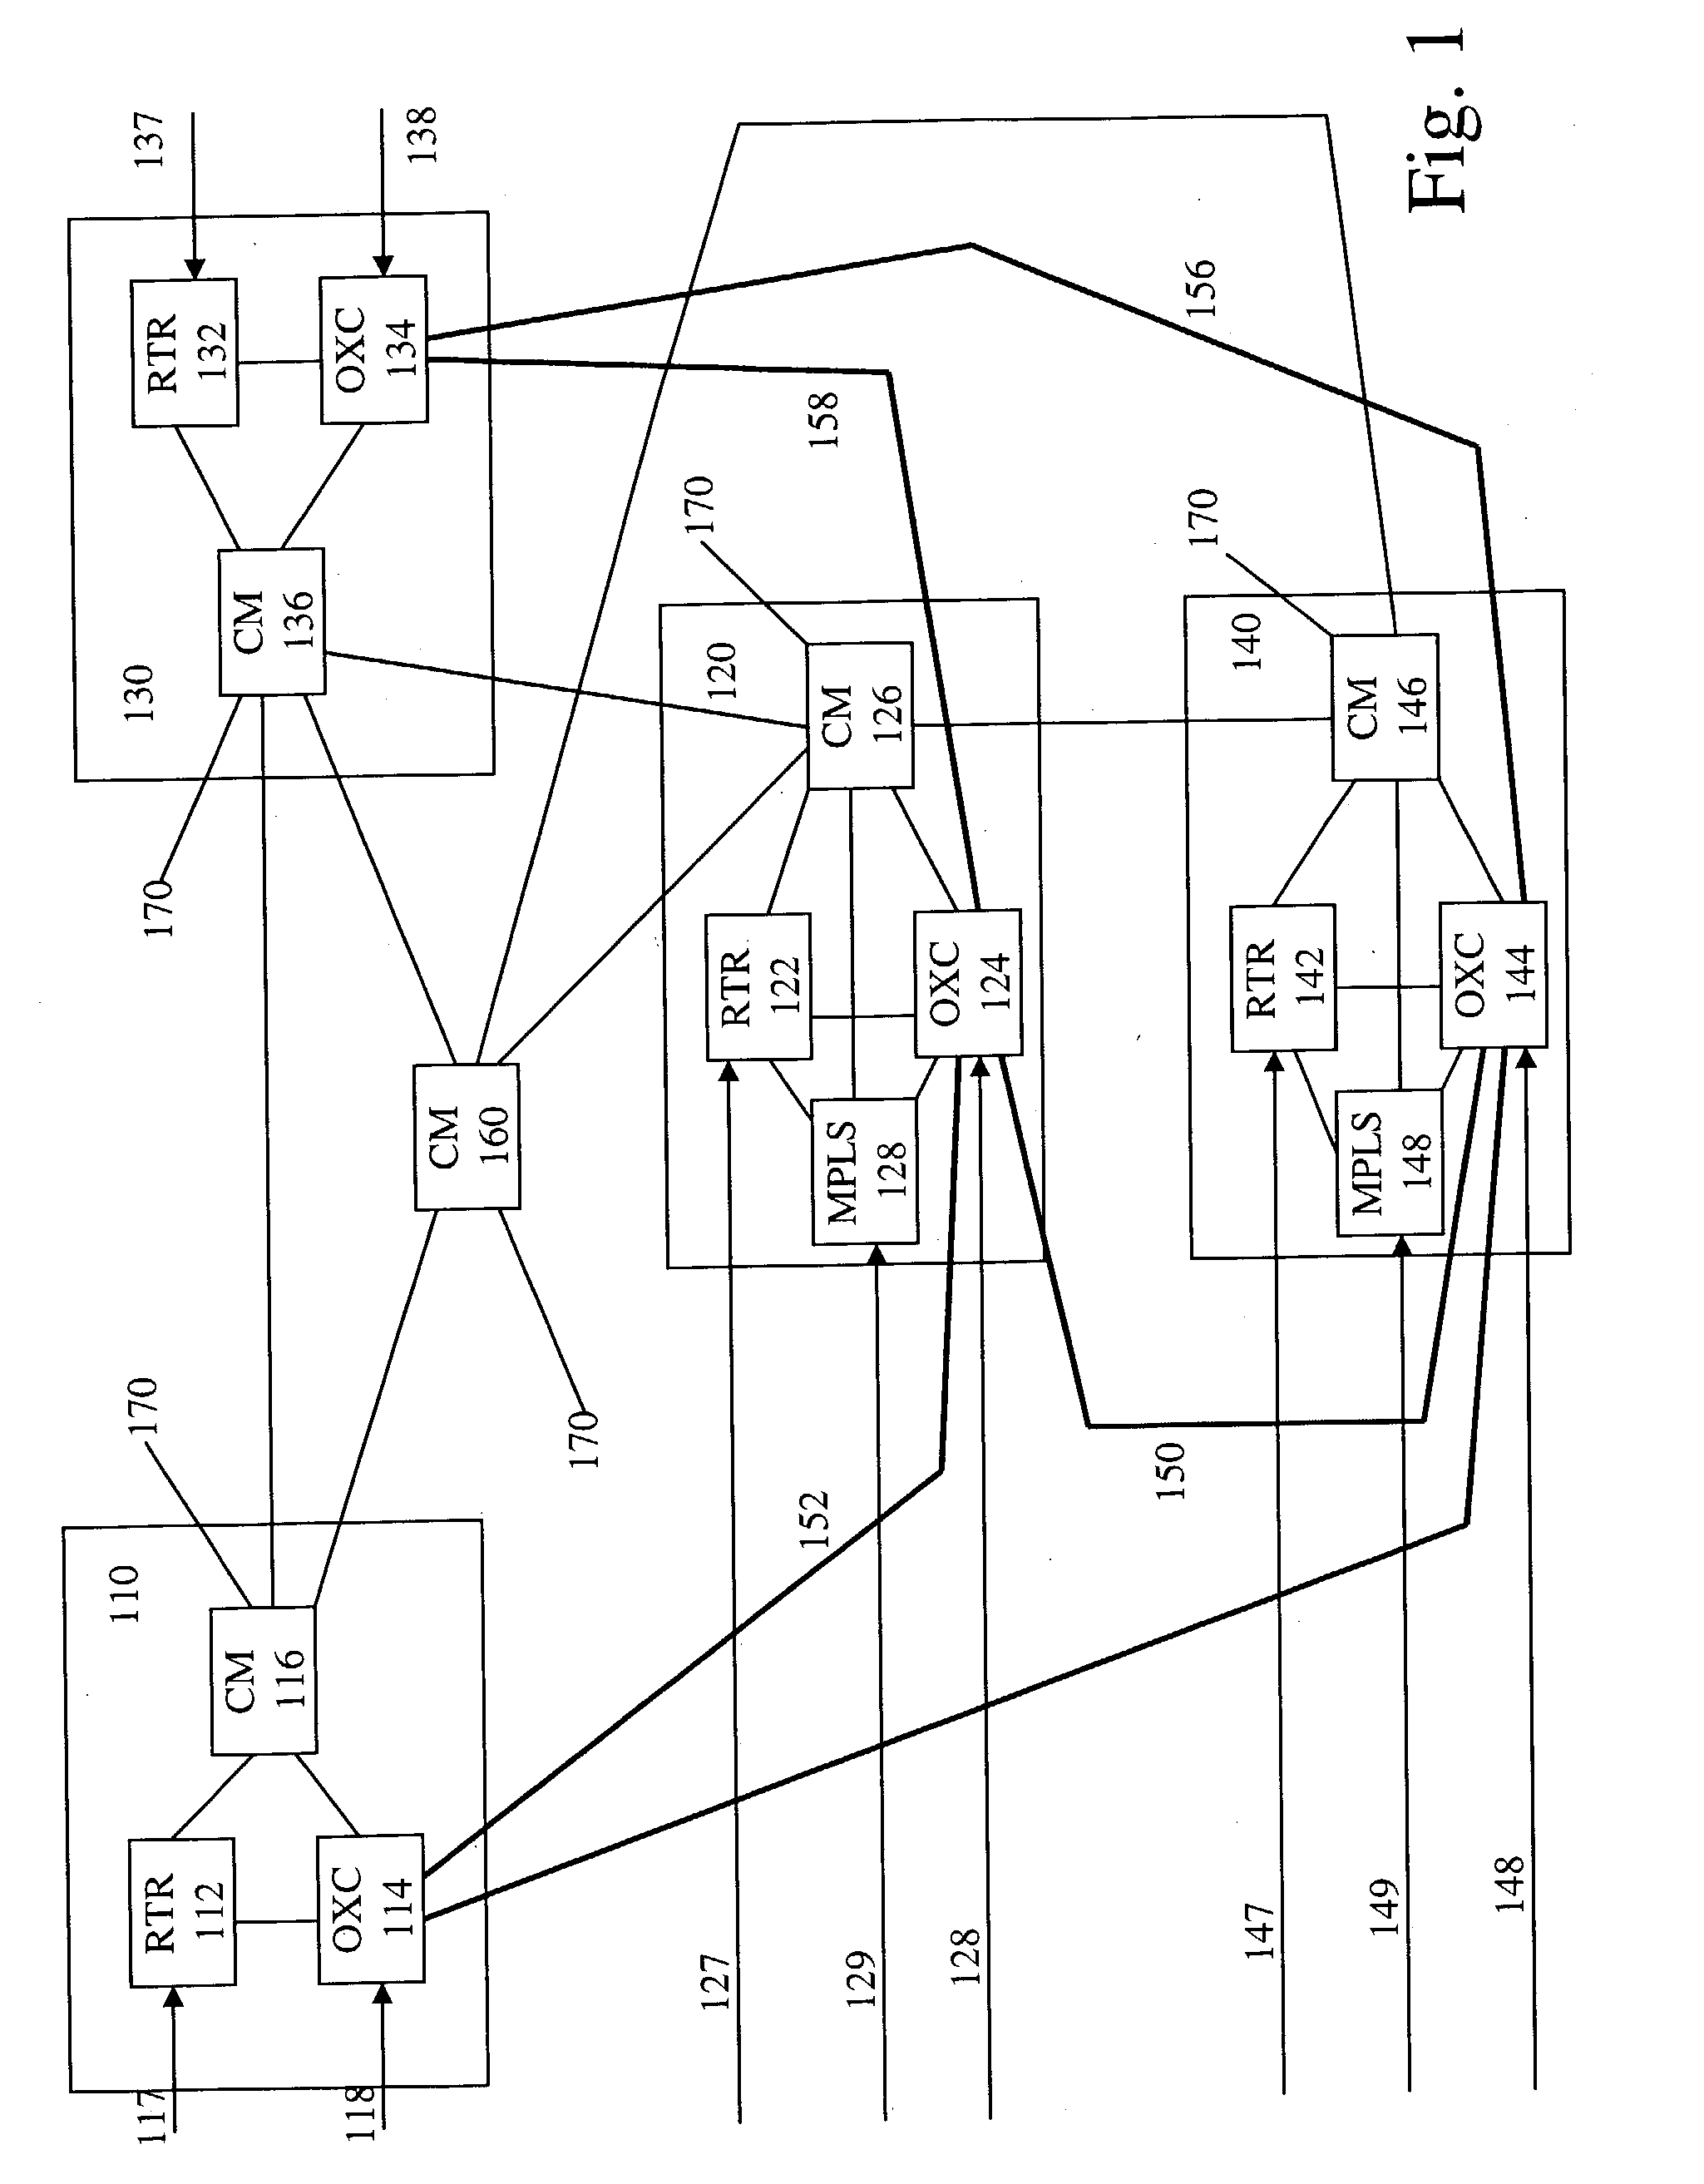 Methods and apparatus for controlling multi-layer communications networks